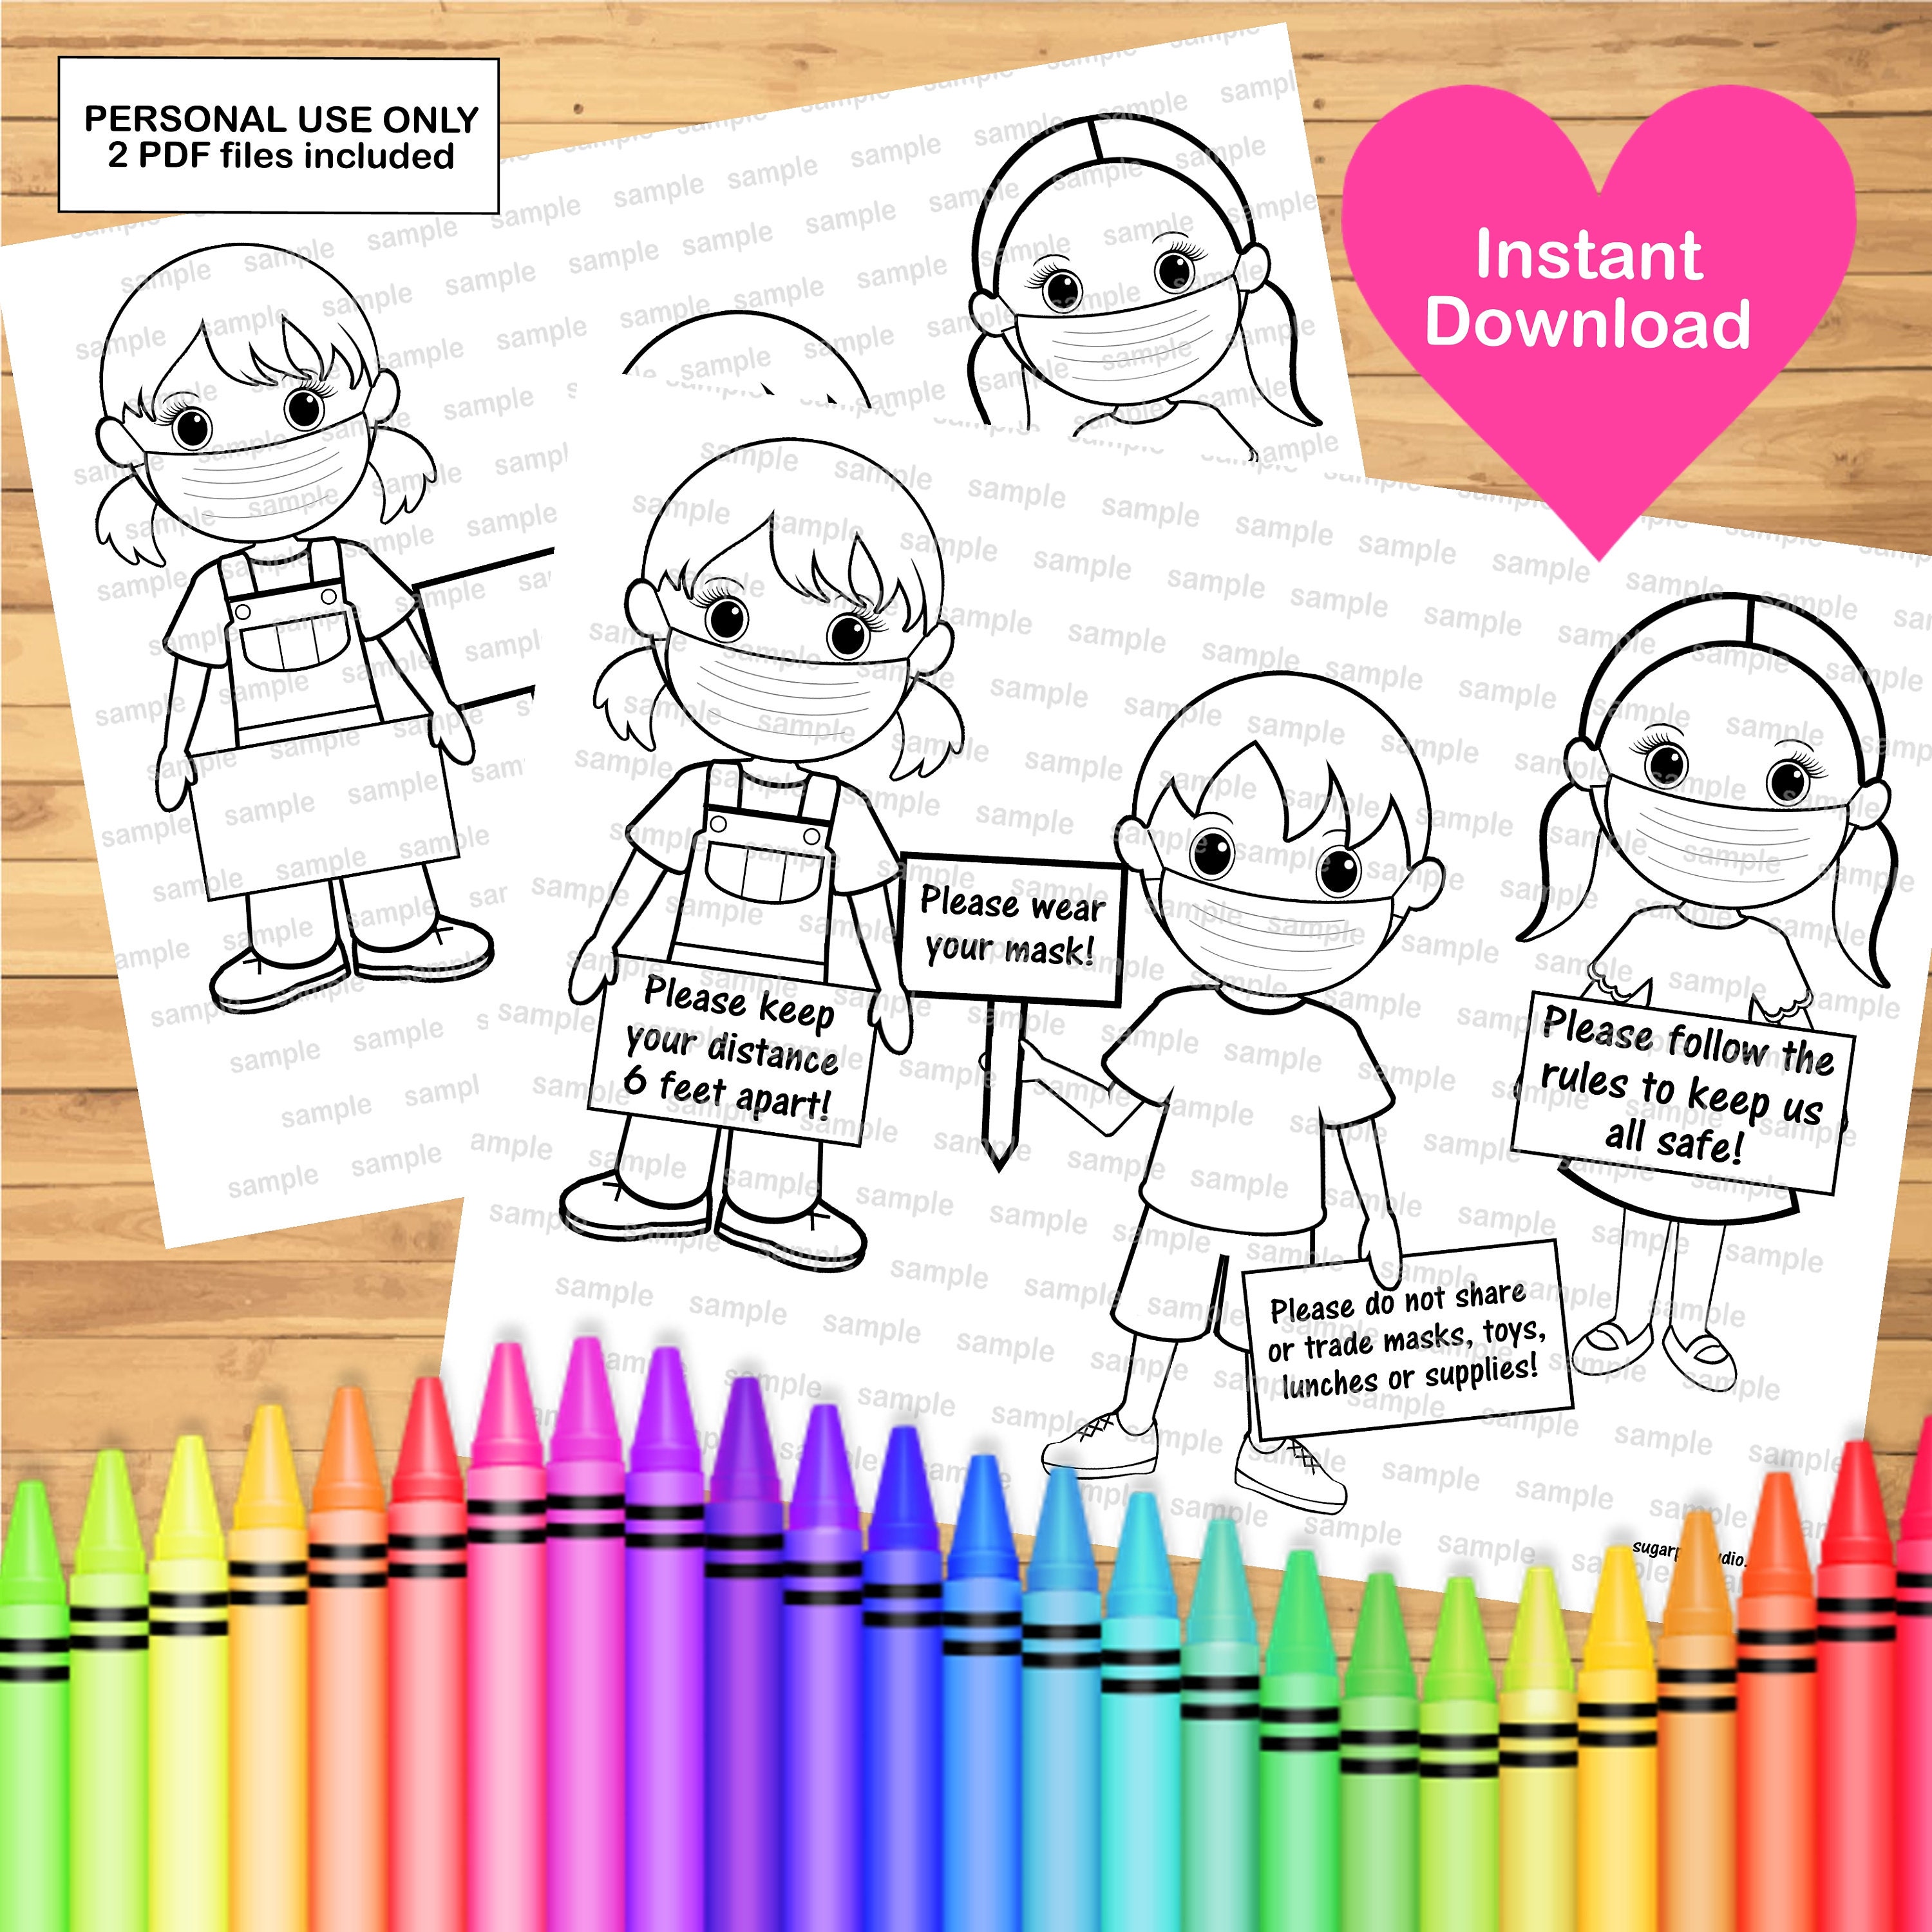 Easy Drawings for Kids - Girls, Boys, Father, Mother & Family - Kids Art &  Craft